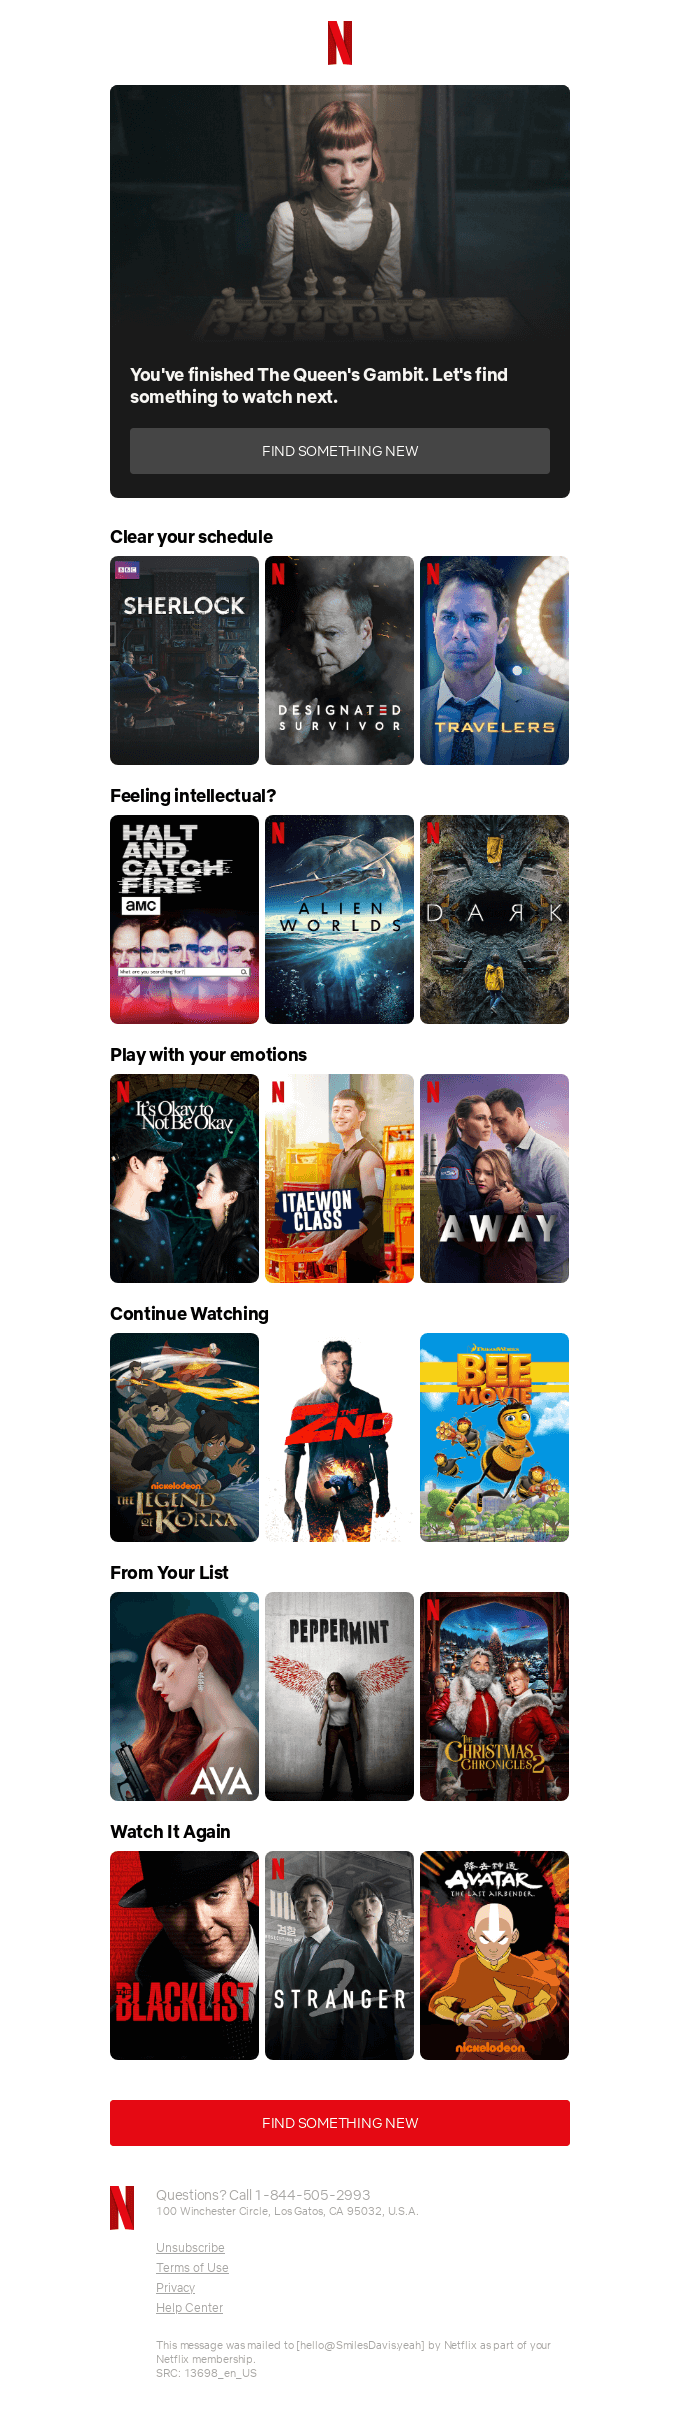 Netflix email marketing campaign recommending movies and shows based on the subscriber's watch history.